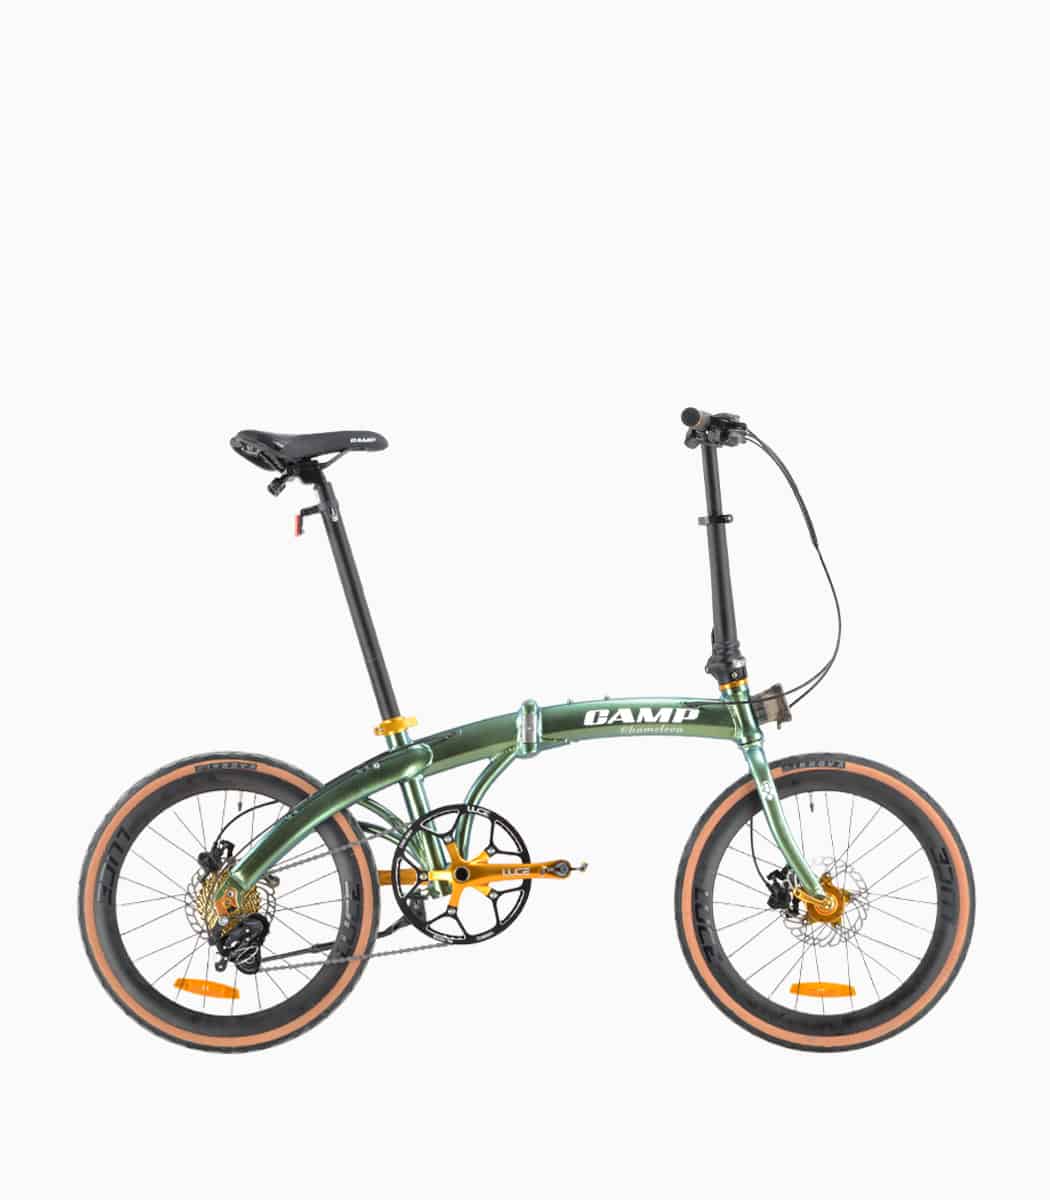 CAMP CHAMELEON (AURORA) foldable bicycle with tanwall tyres right